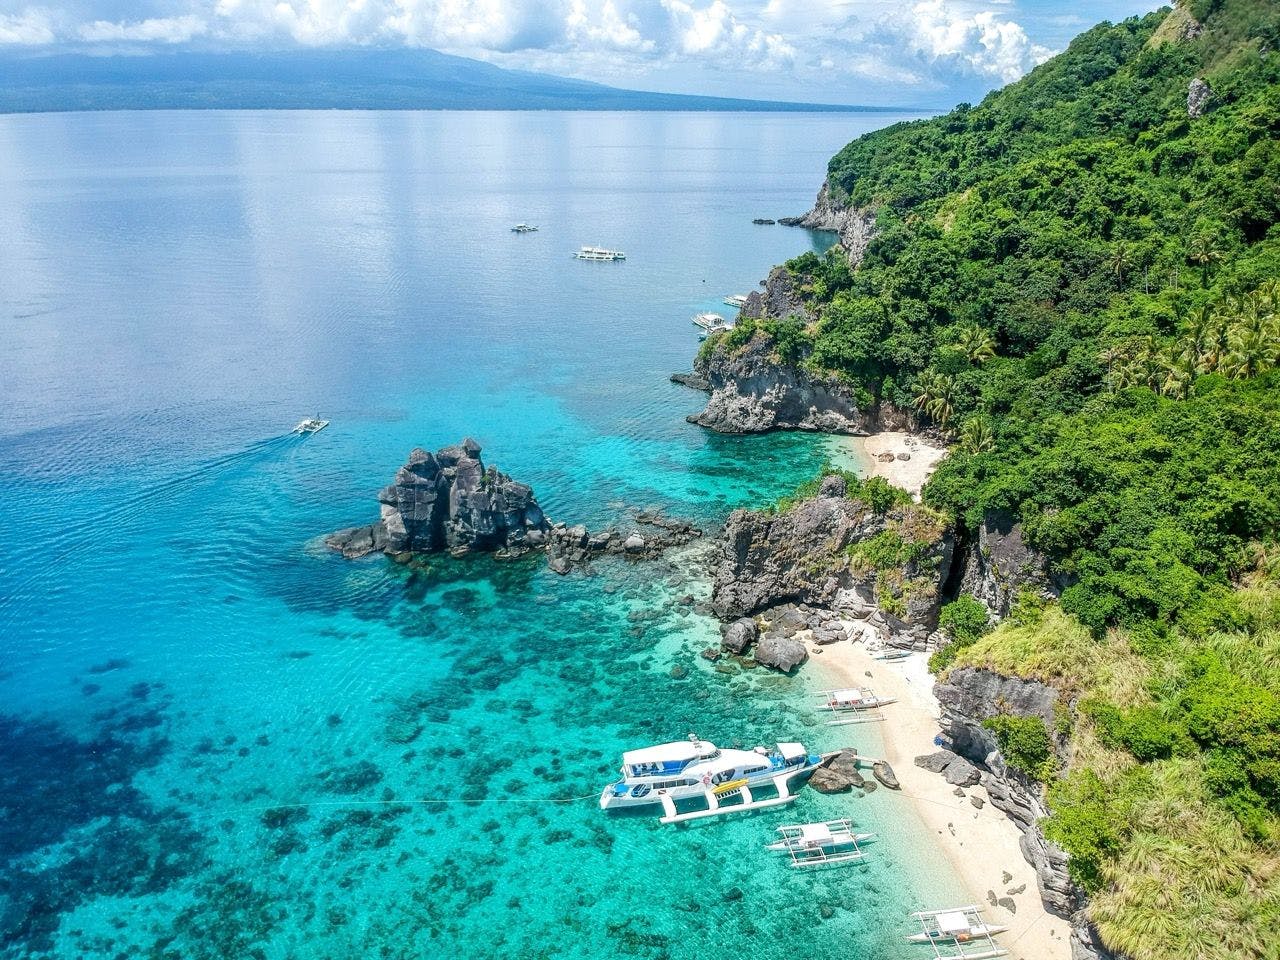 Boats on the coast of Apo Island in Philippines